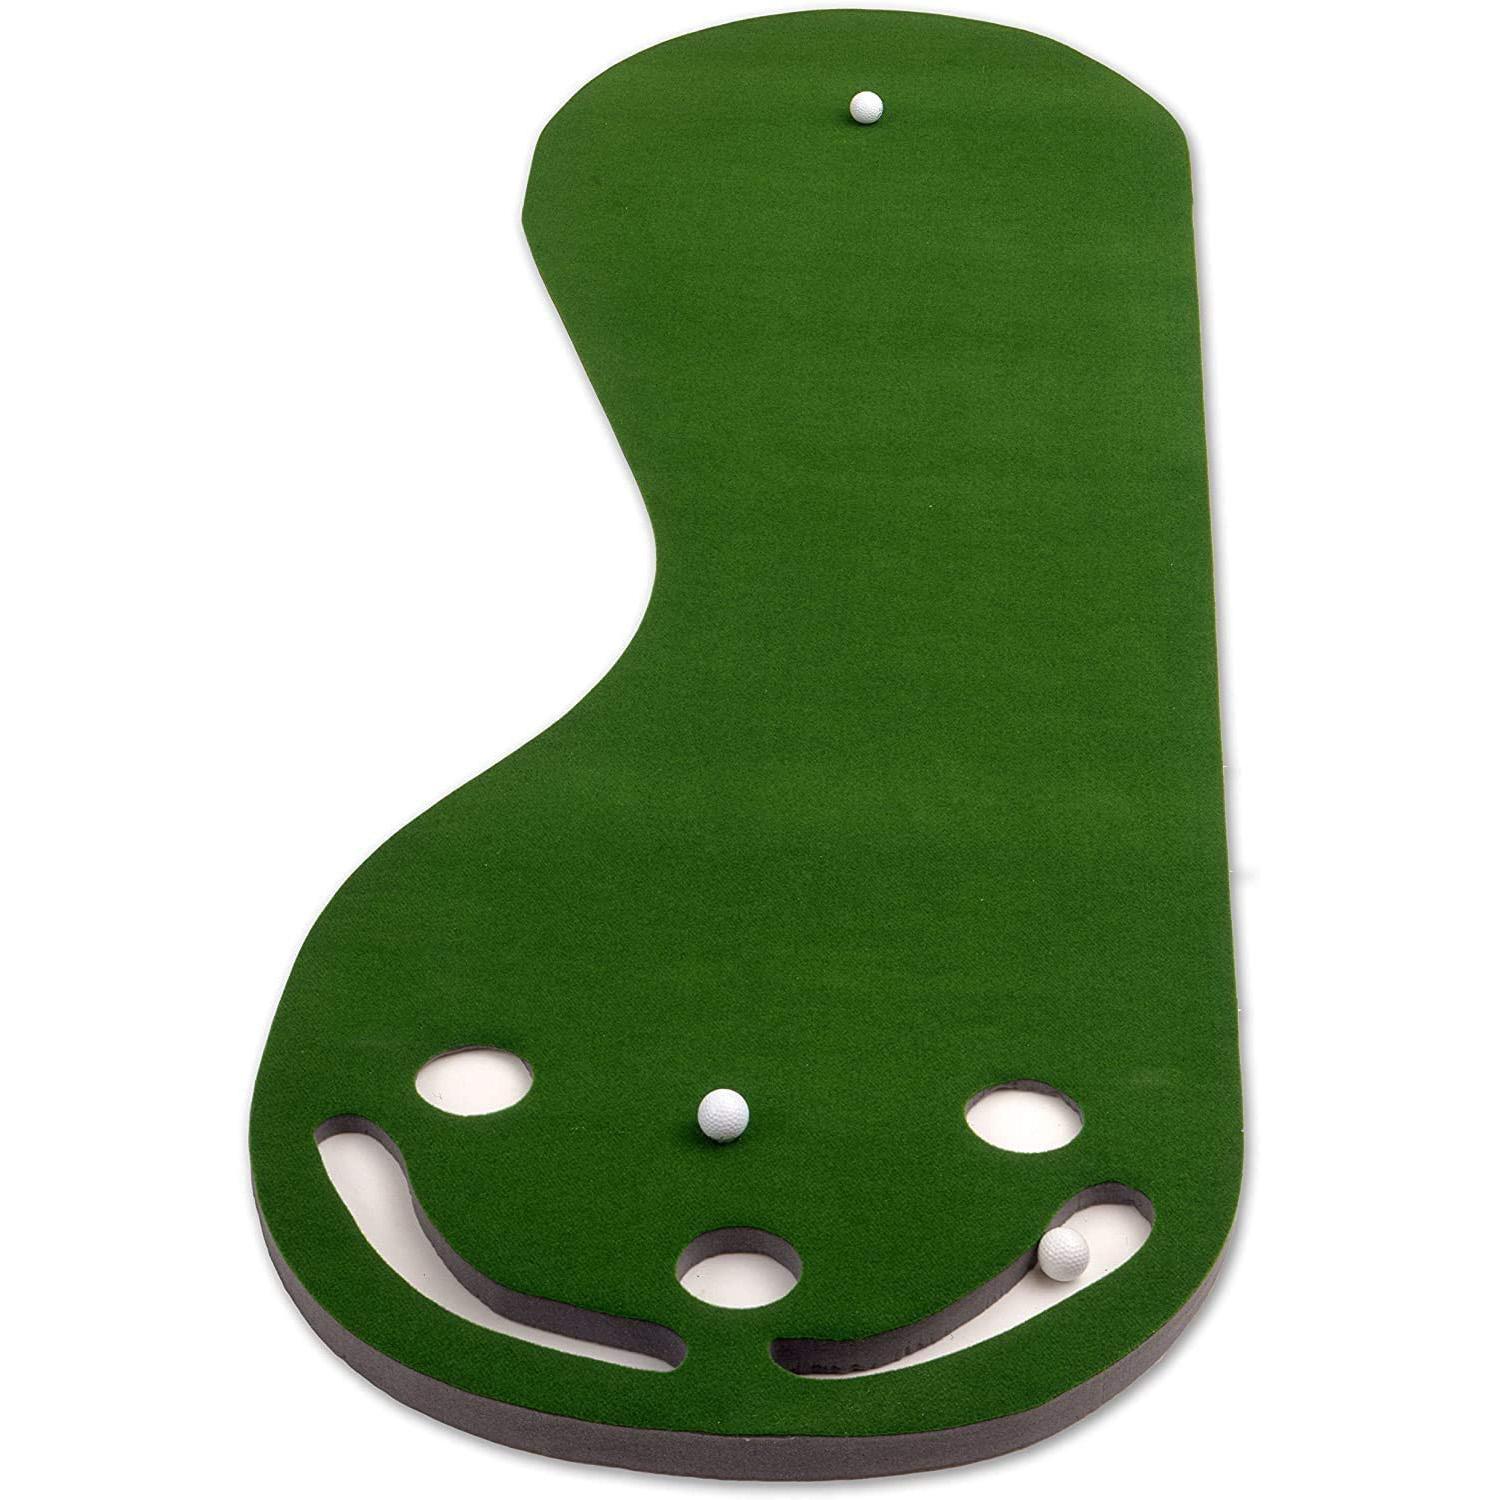 Putt-A-Bout Par Three Golf Putting Green for $25.41 Shipped